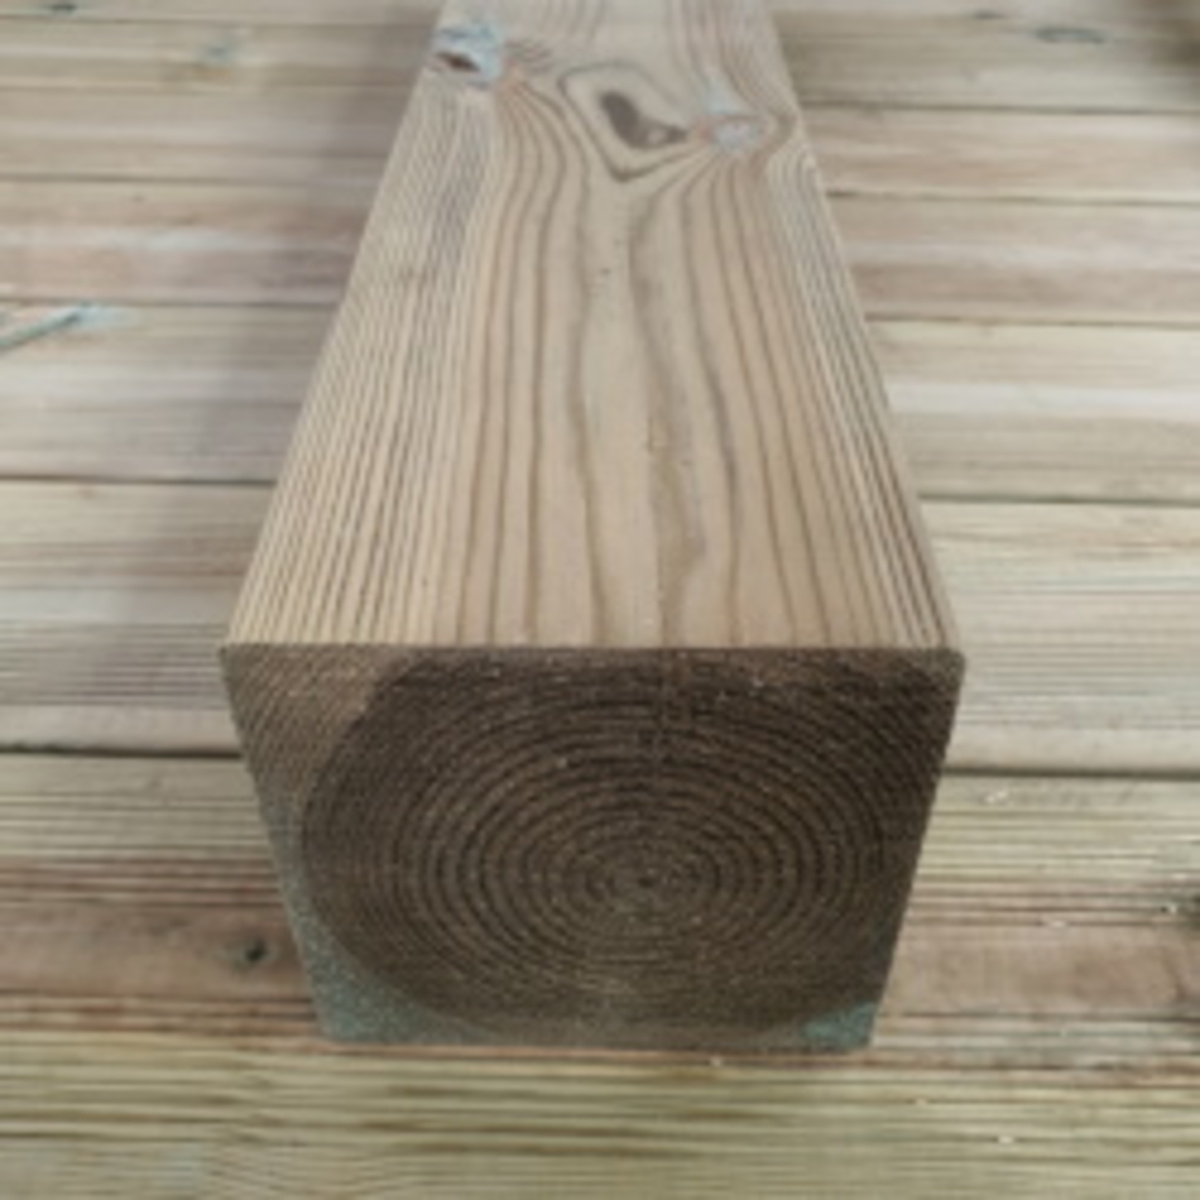 Pressure treated lumber for outdoors